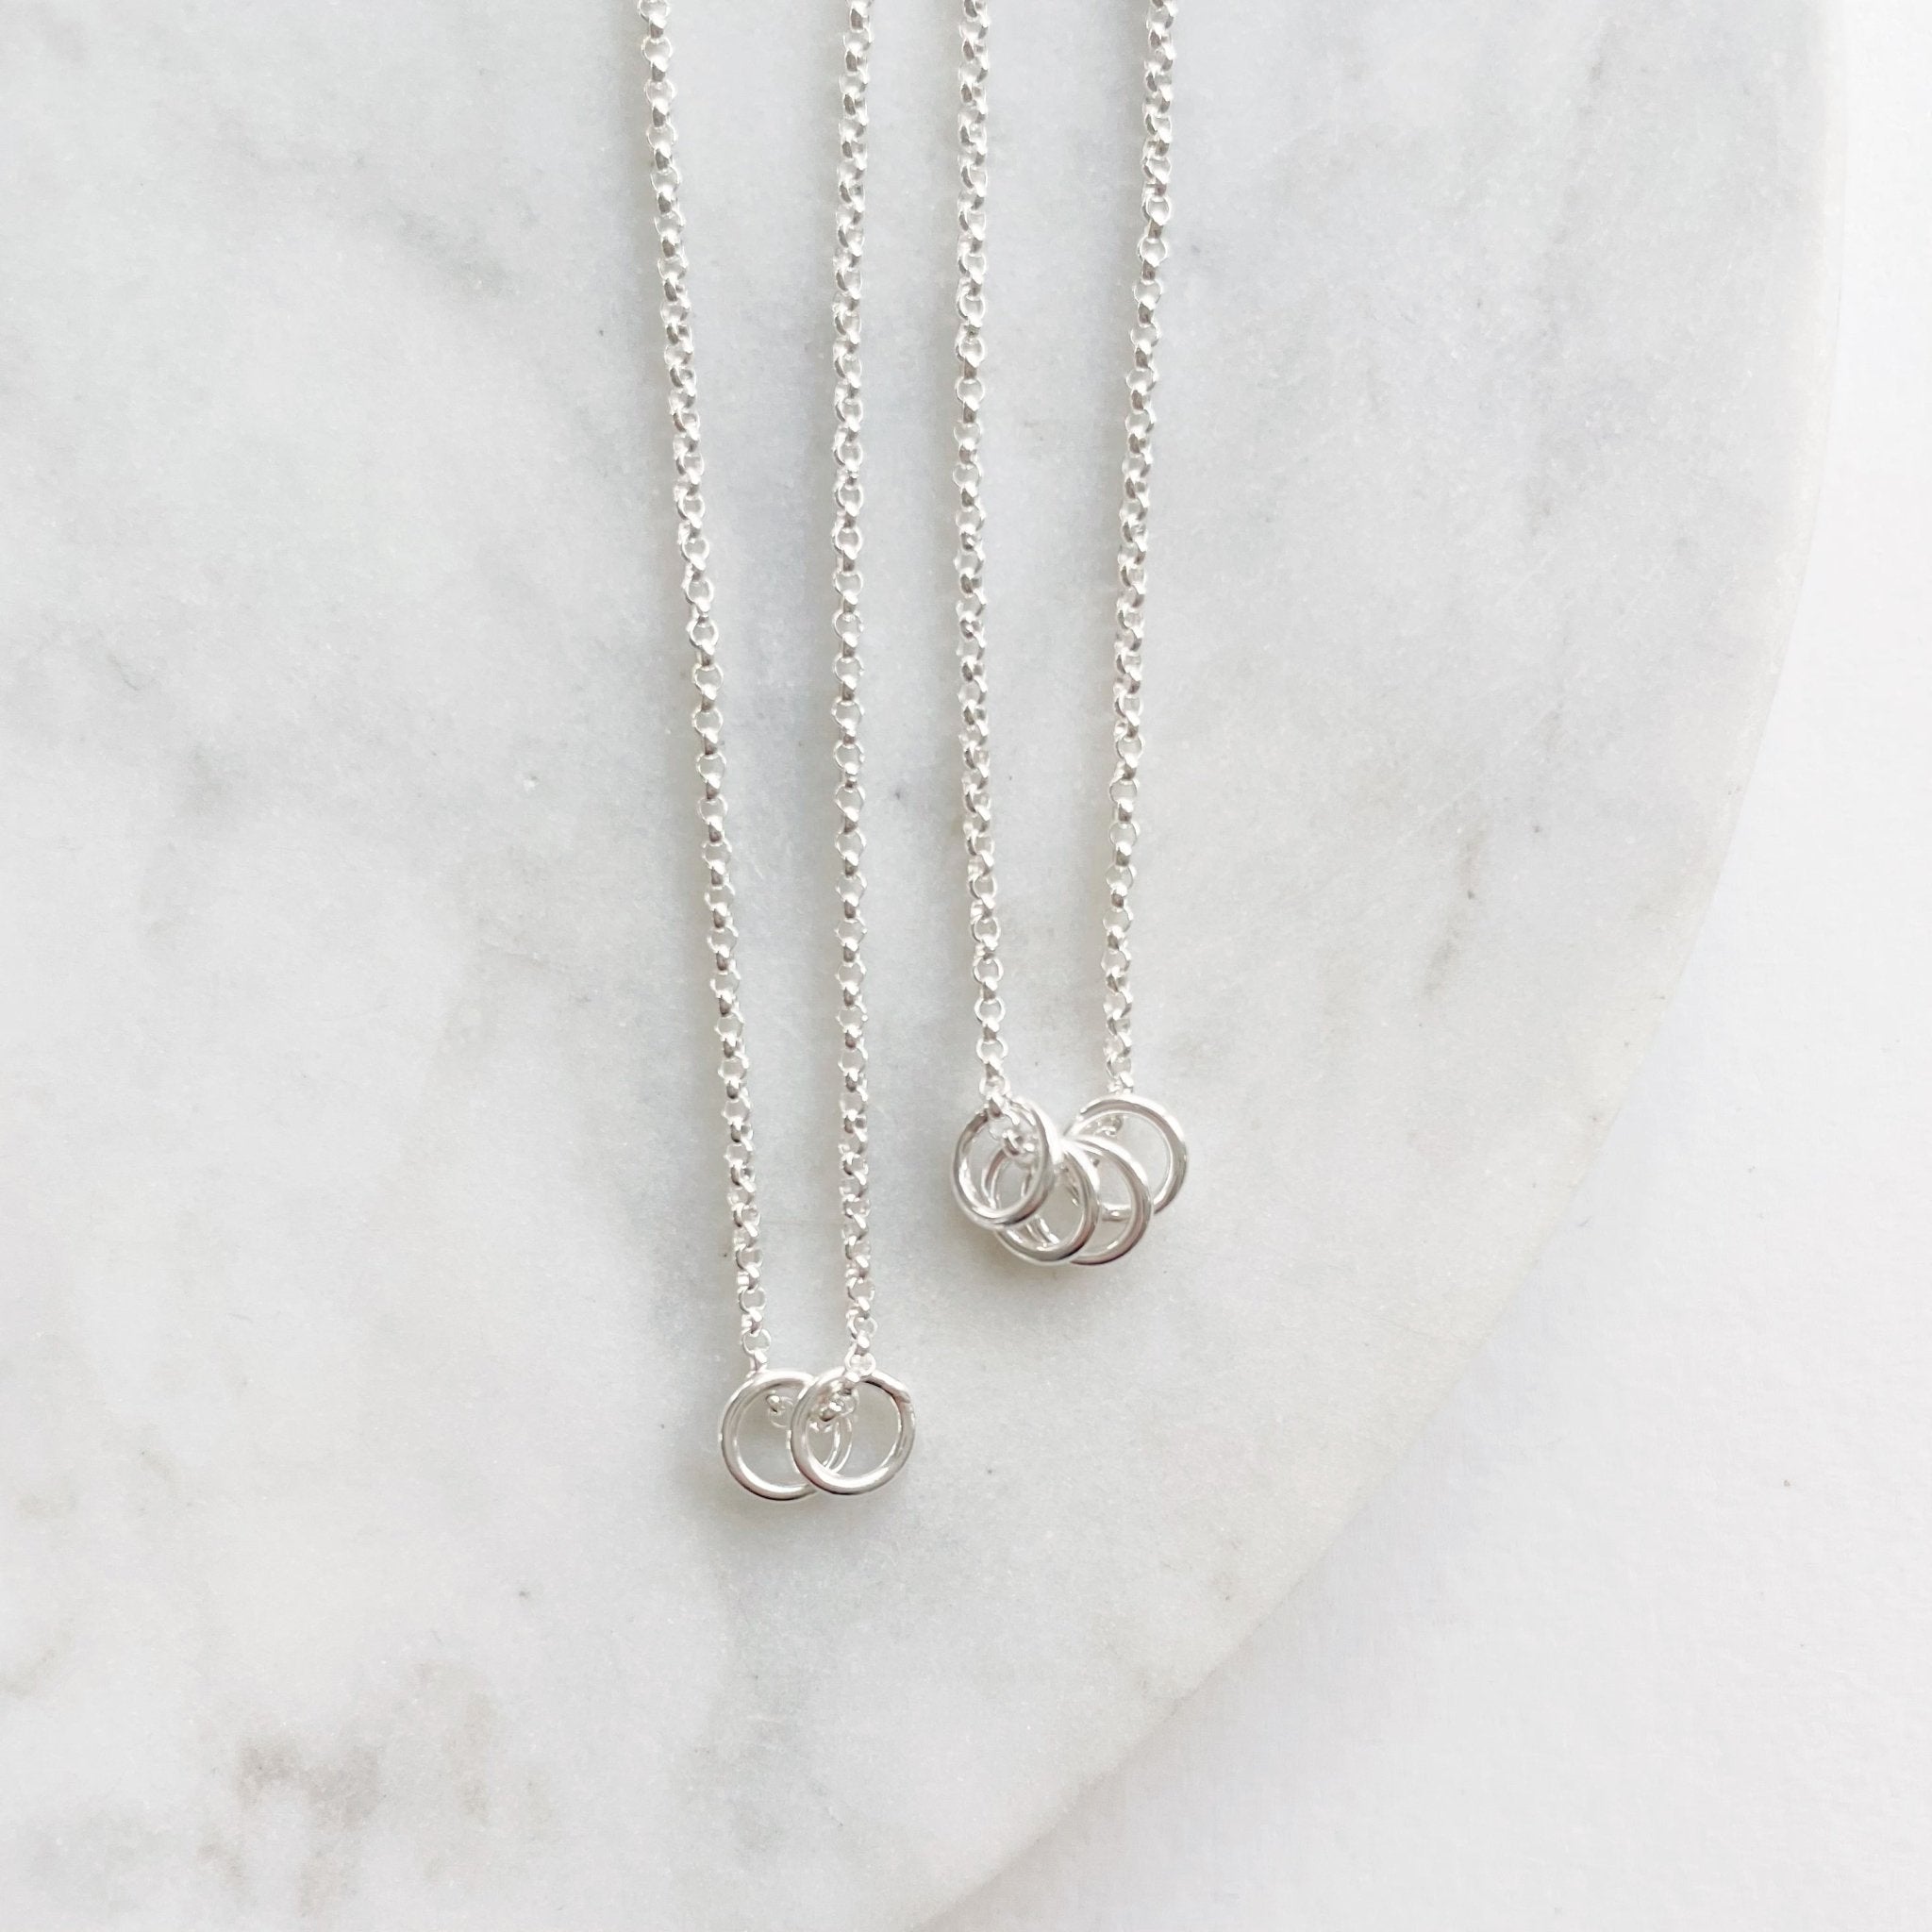 2 silver necklaces with 2 and 4 tiny silver rings. Honor Necklace by Sarah Cornwell Jewelry